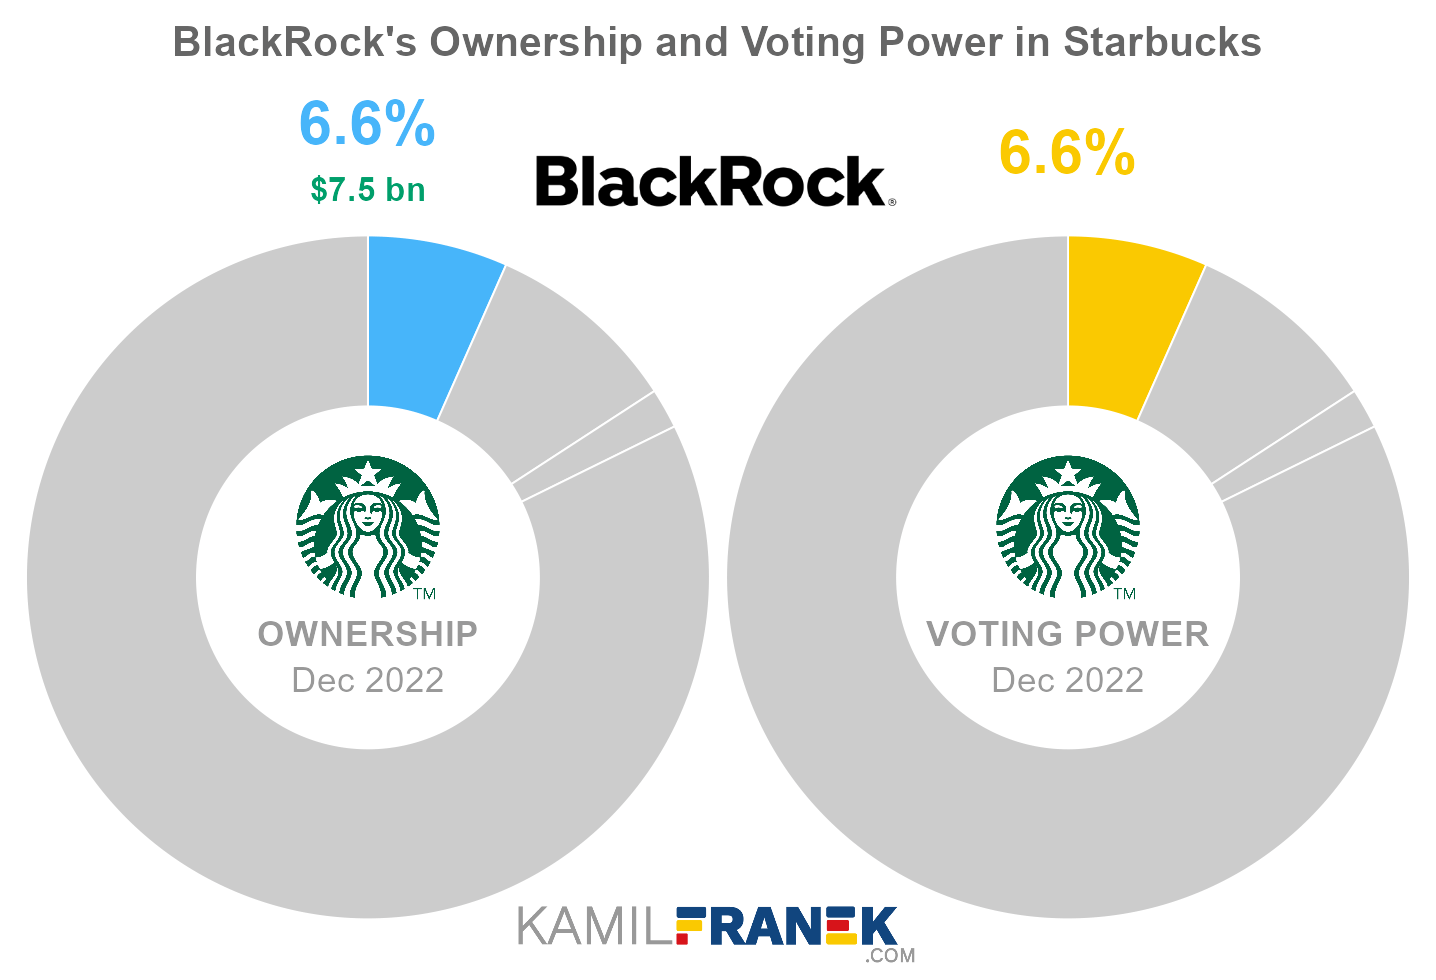 BlackRock's share ownership and voting power in Starbucks (chart)